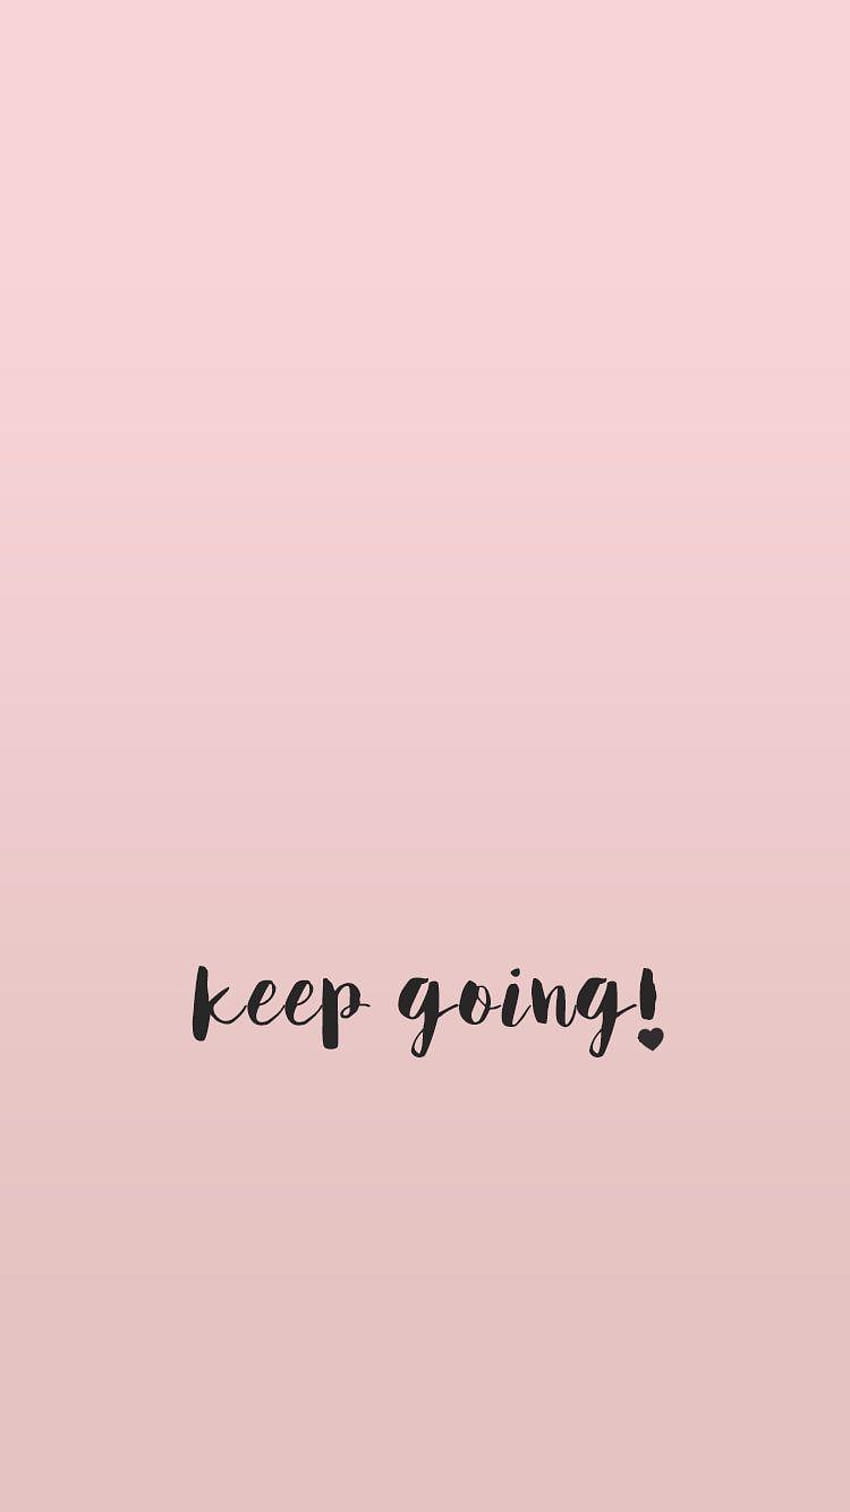 minimal, quote, quotes, inspirational, pink, girly, background pics with inspiration qoutes HD phone wallpaper